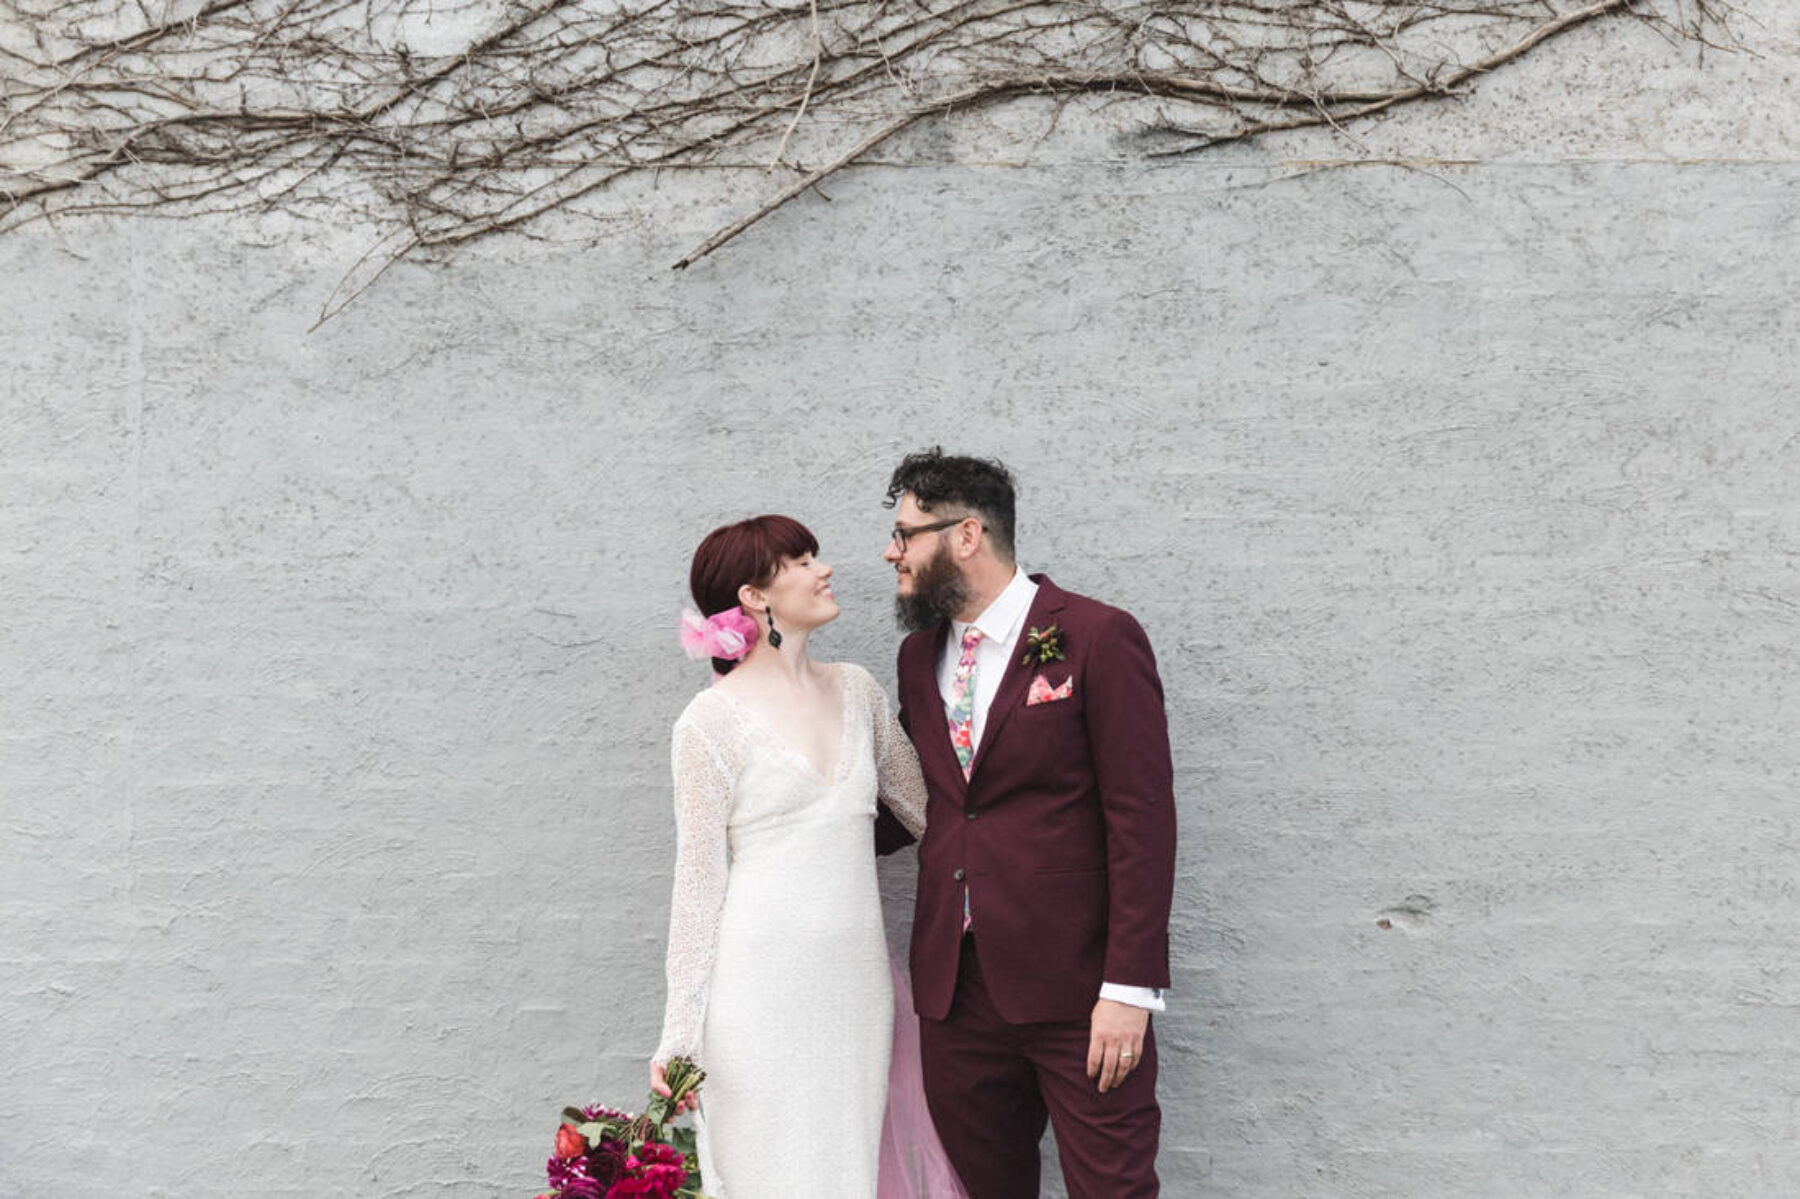 bearded groom and bride with pink tulle veil